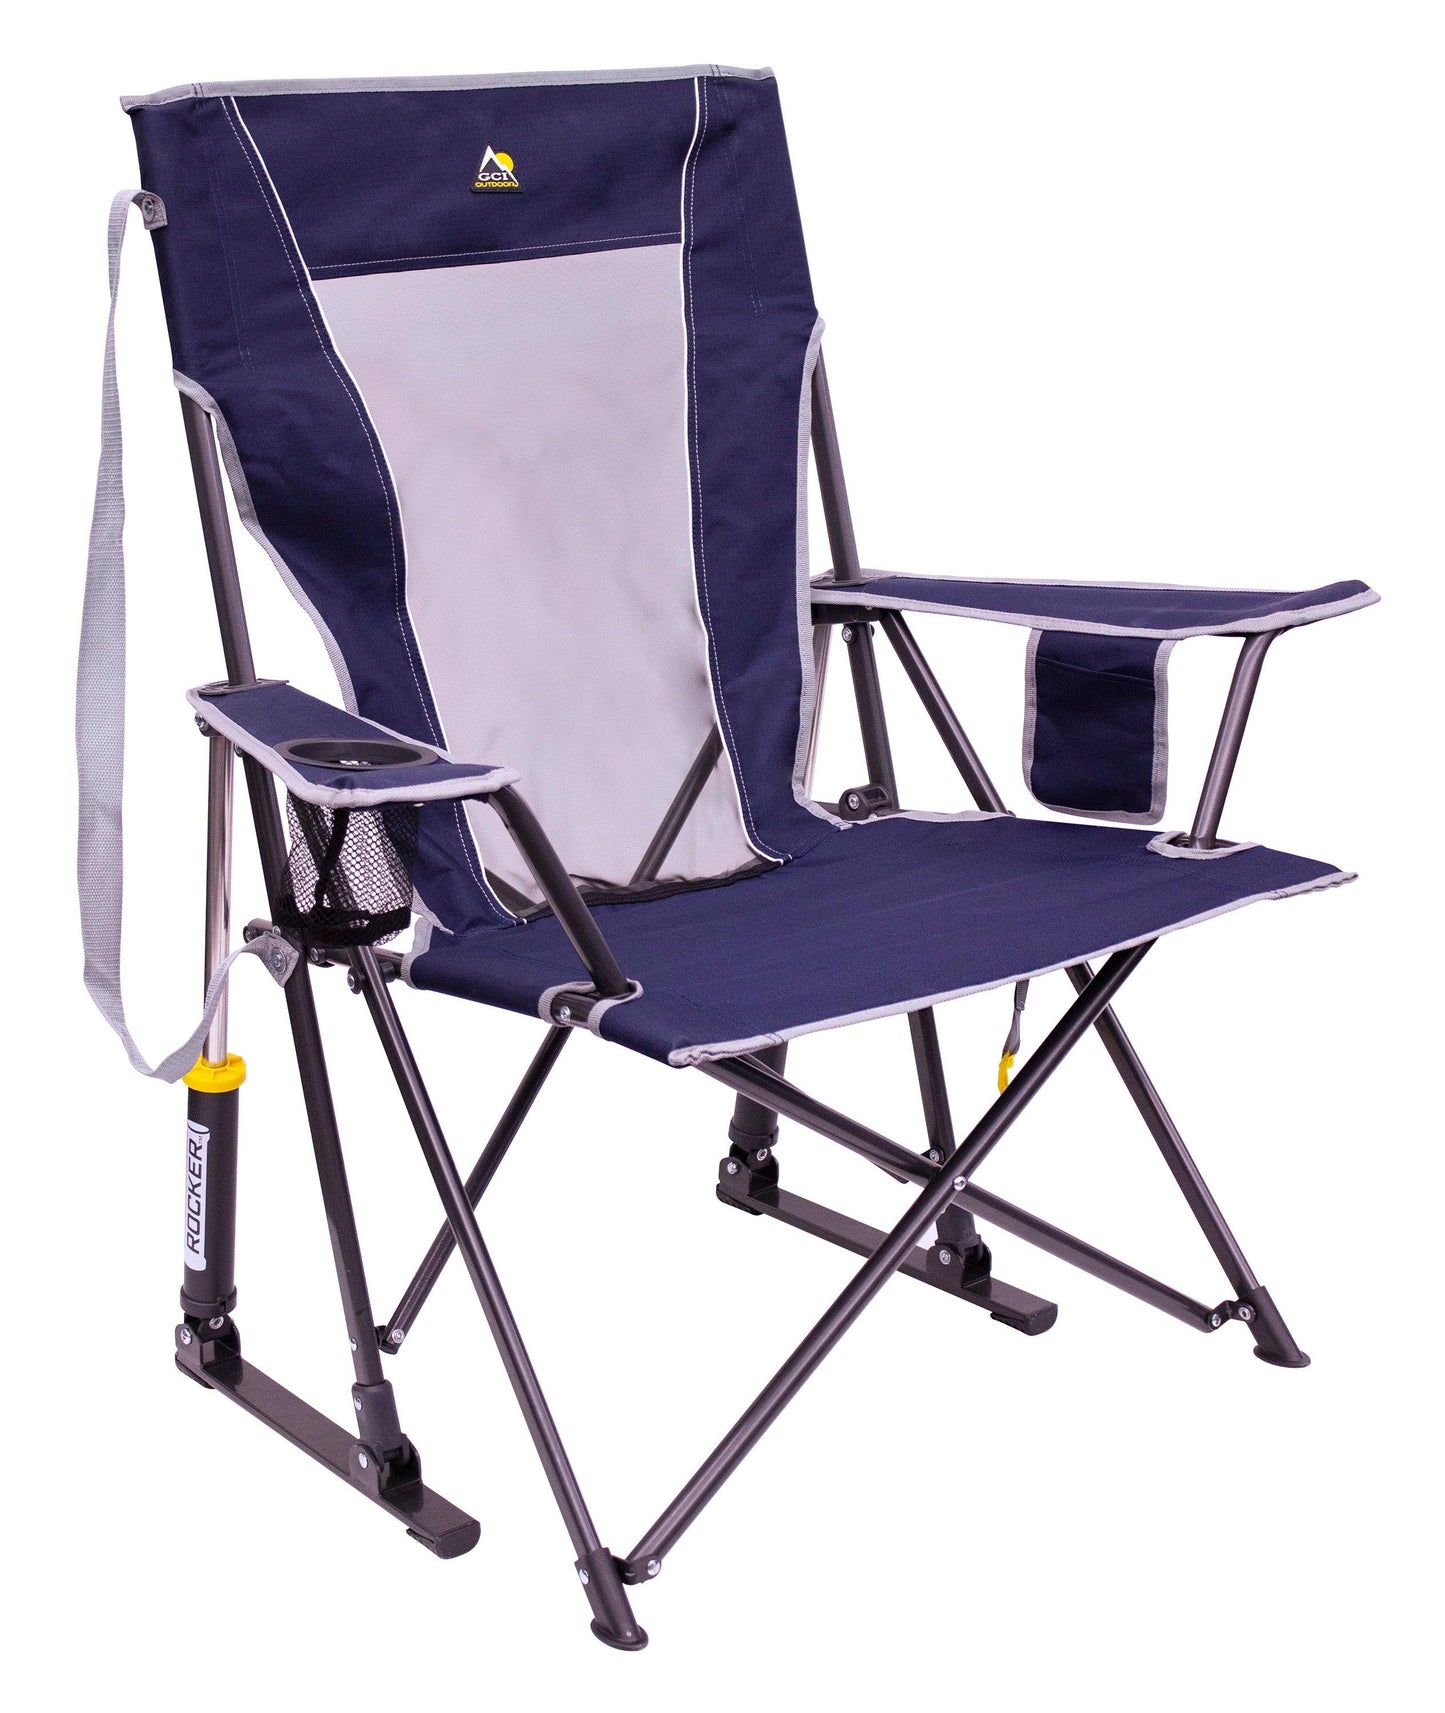 GCI Outdoor Comfort Pro Rocker Collapsible Rocking Chair & Outdoor Camping Chair